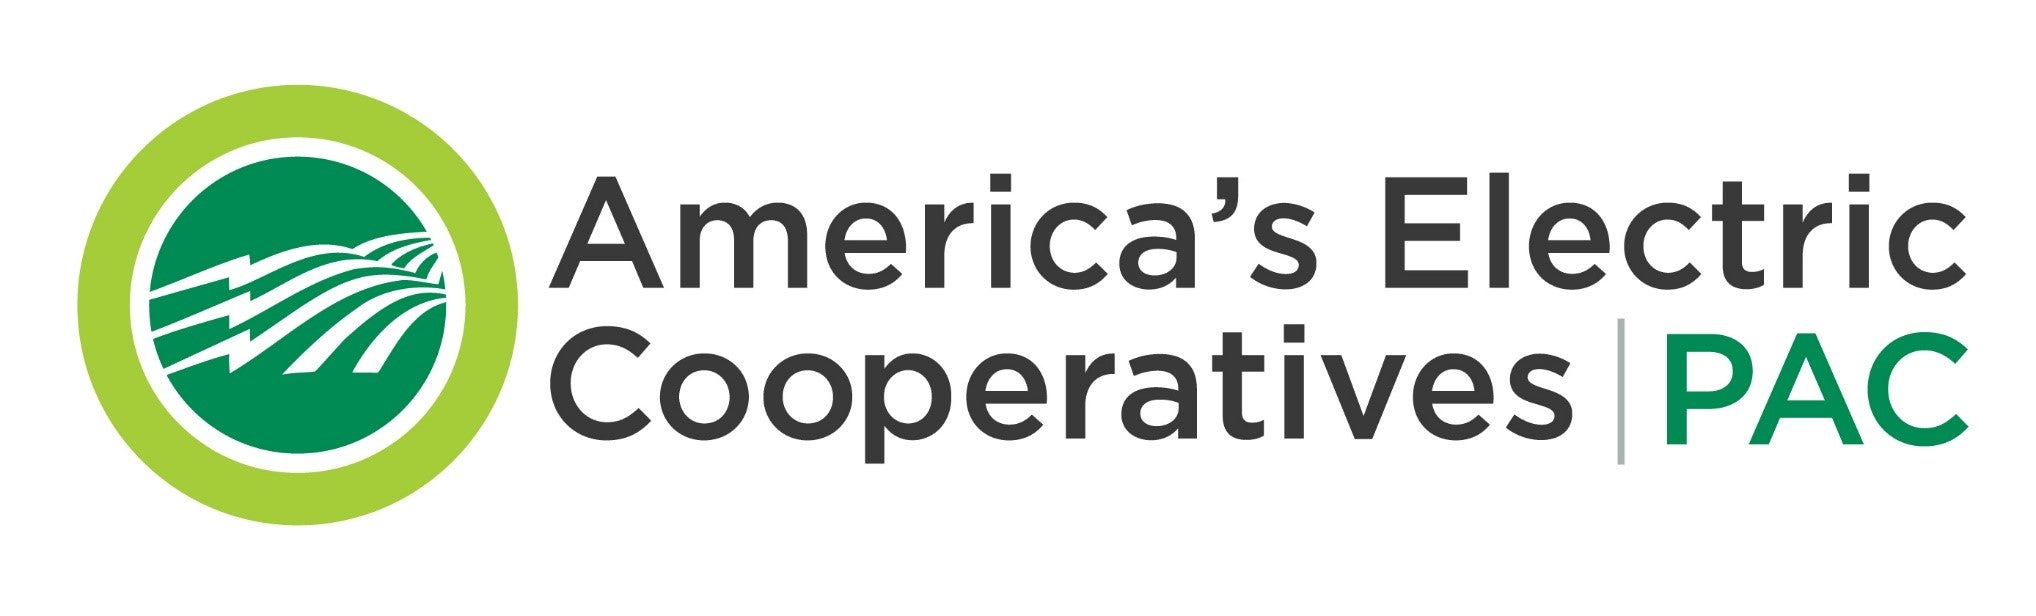 America's Electric Cooperatives PAC logo